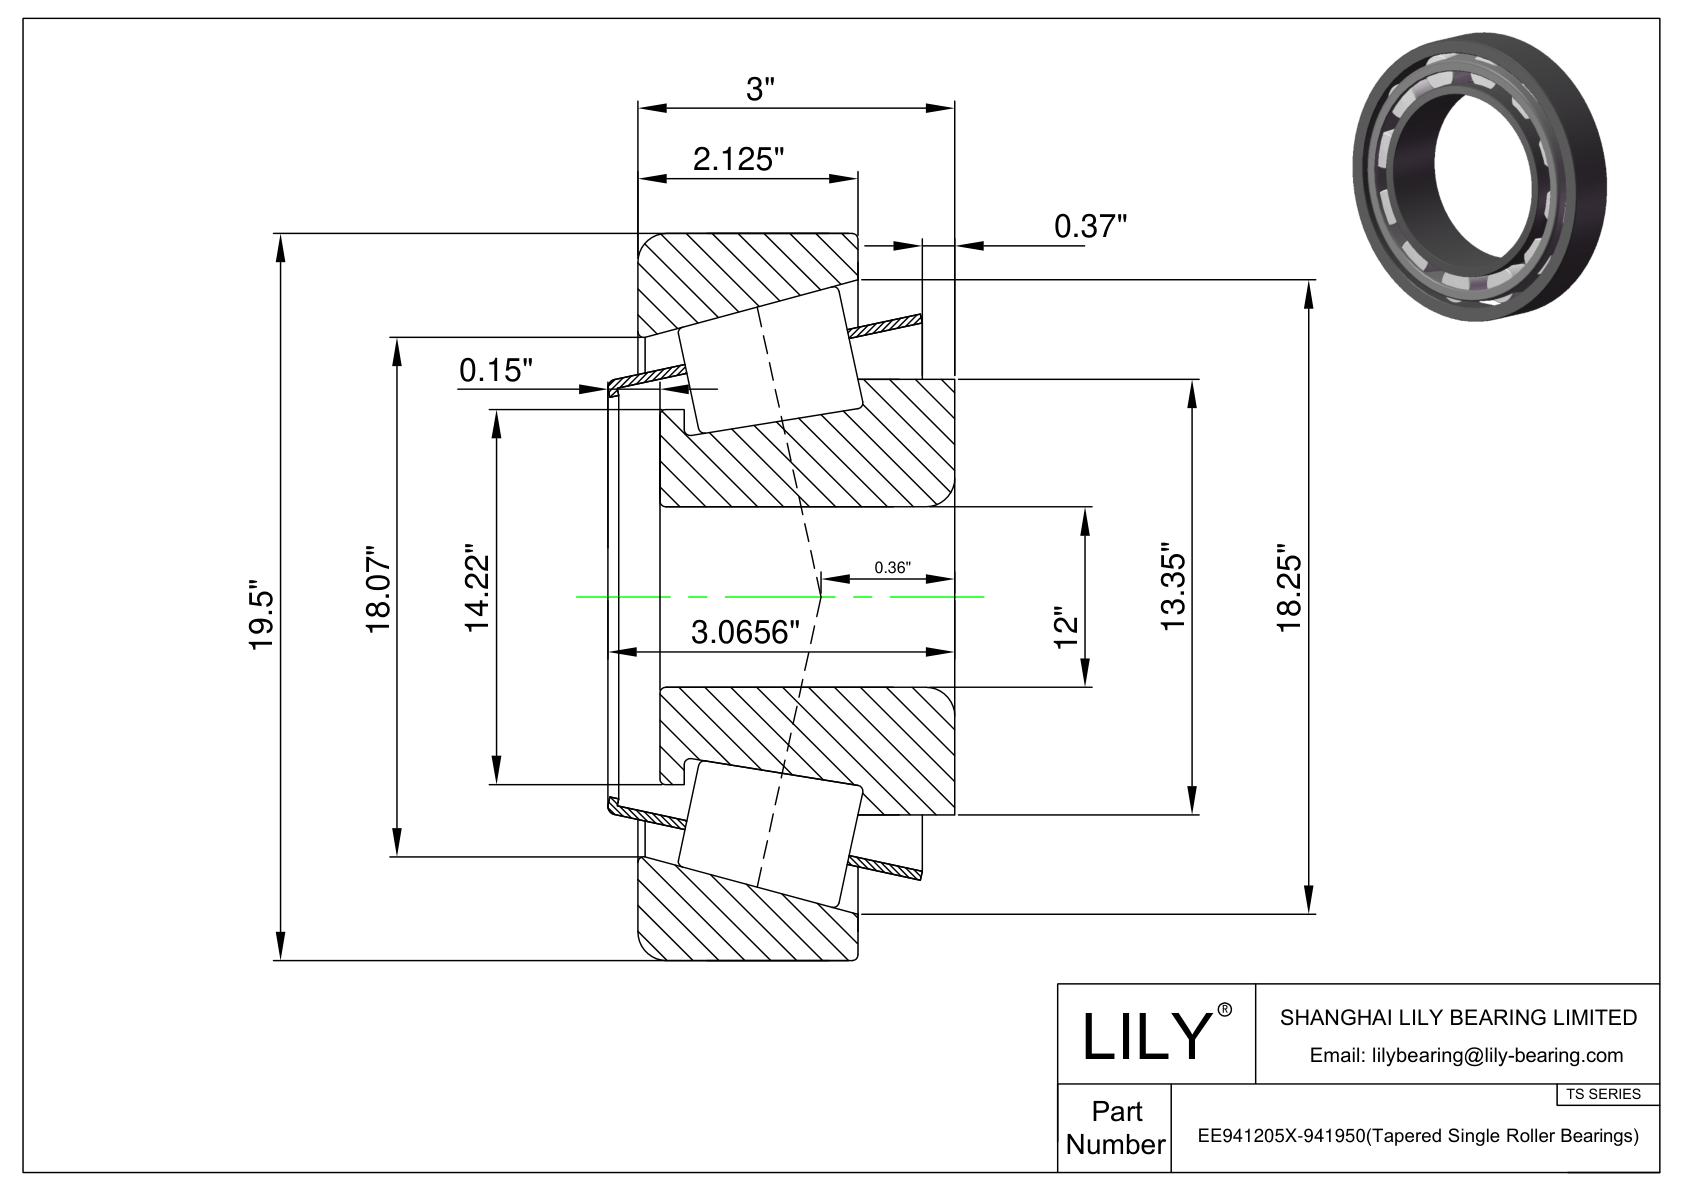 EE941205X-941950 TS (Tapered Single Roller Bearings) (Imperial) cad drawing